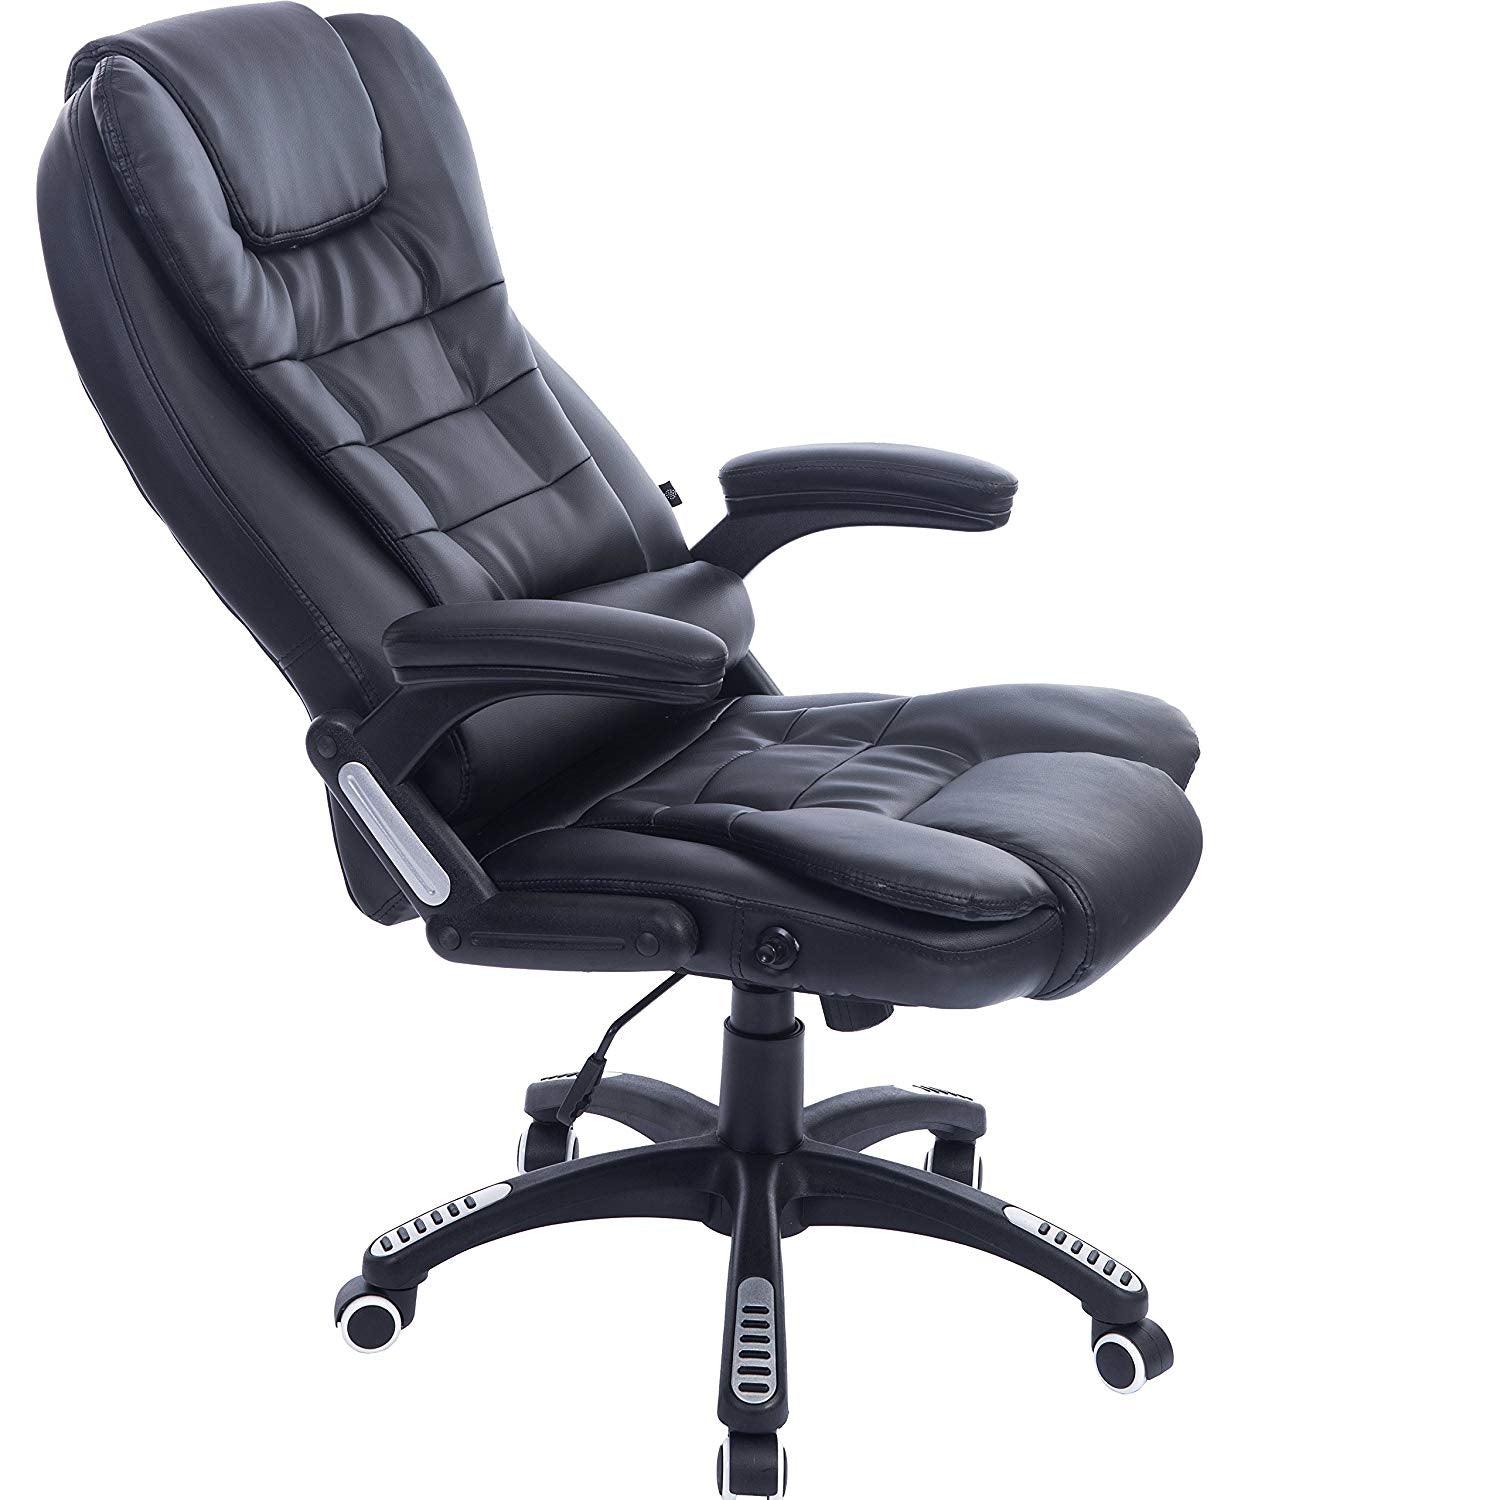 Executive Recline Padded Swivel Office Chair with Vibrating Massage Function, MM17 Black